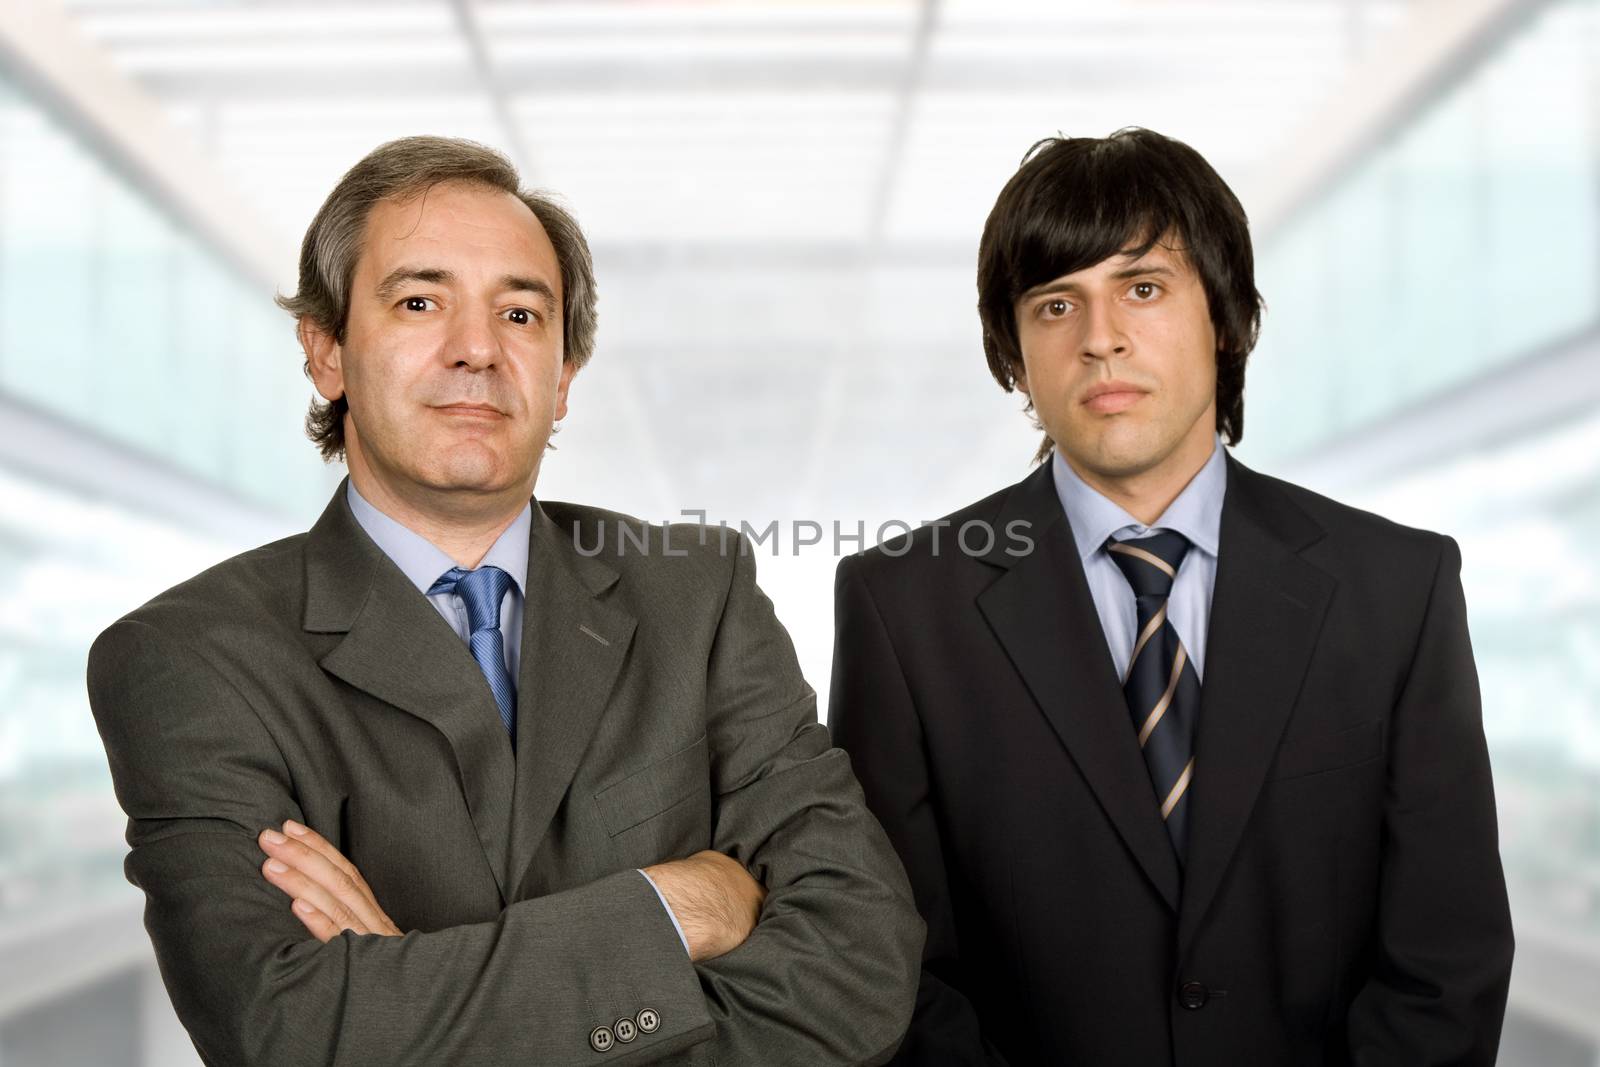 two young business men portrait, at the office